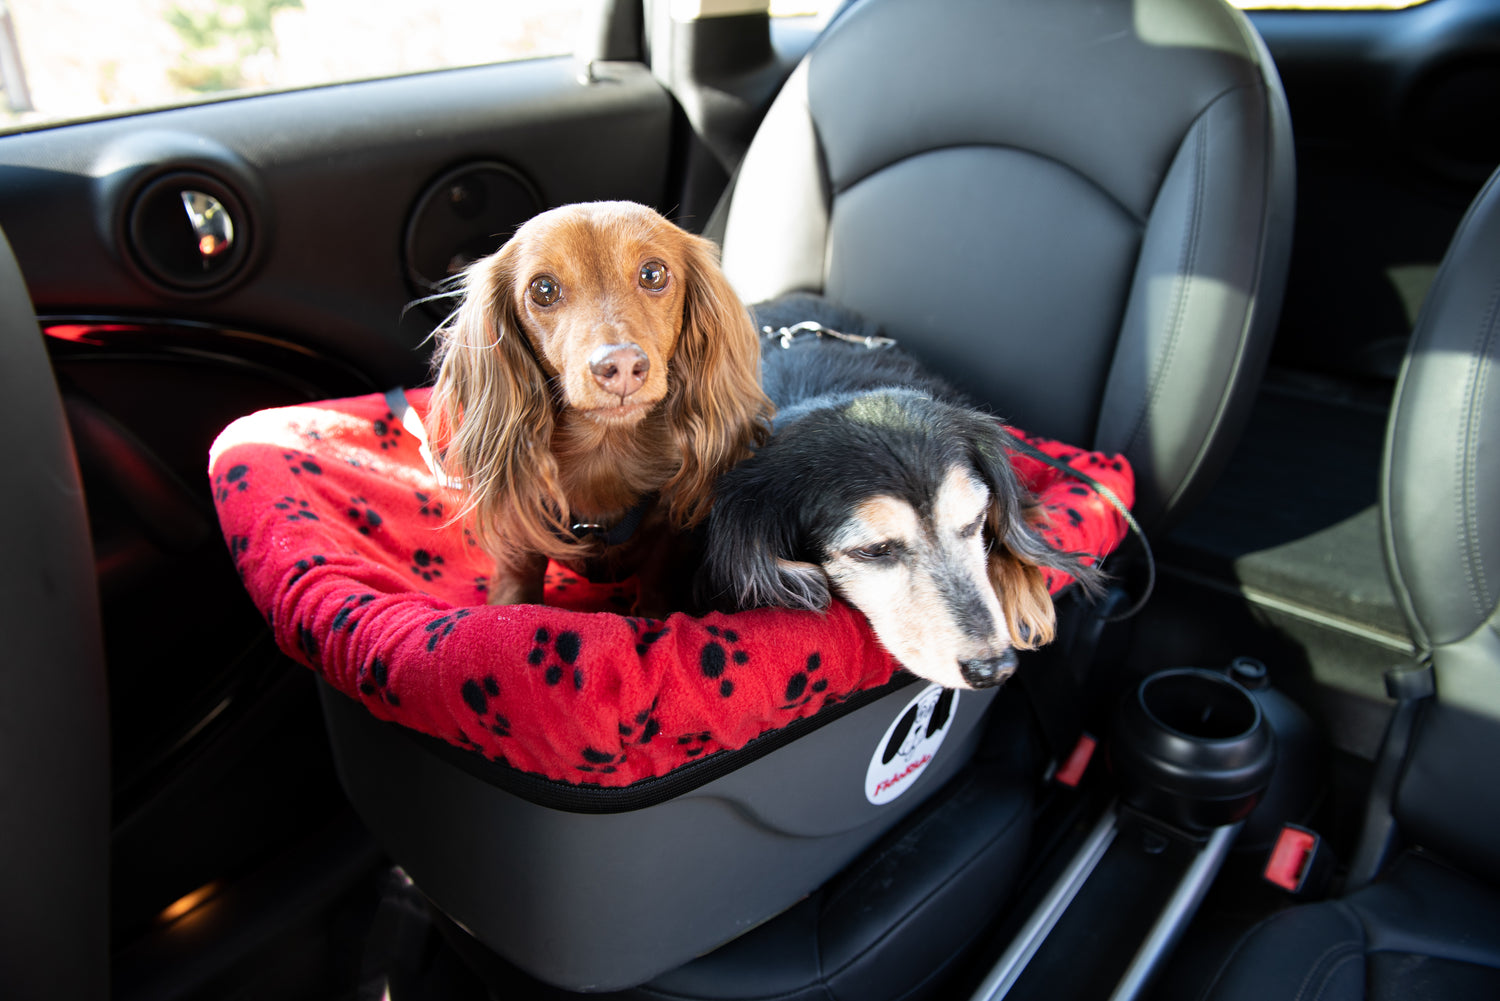 Two long haired dachshunds secured in one FidoRido dog car seat with a red fleece cover with black paw prints.  The black dog with tan face rests its head on the side of the seat while the reddish brown dog stands alert in the dog seat which is secured in the back seat of a car with black and grey interior.